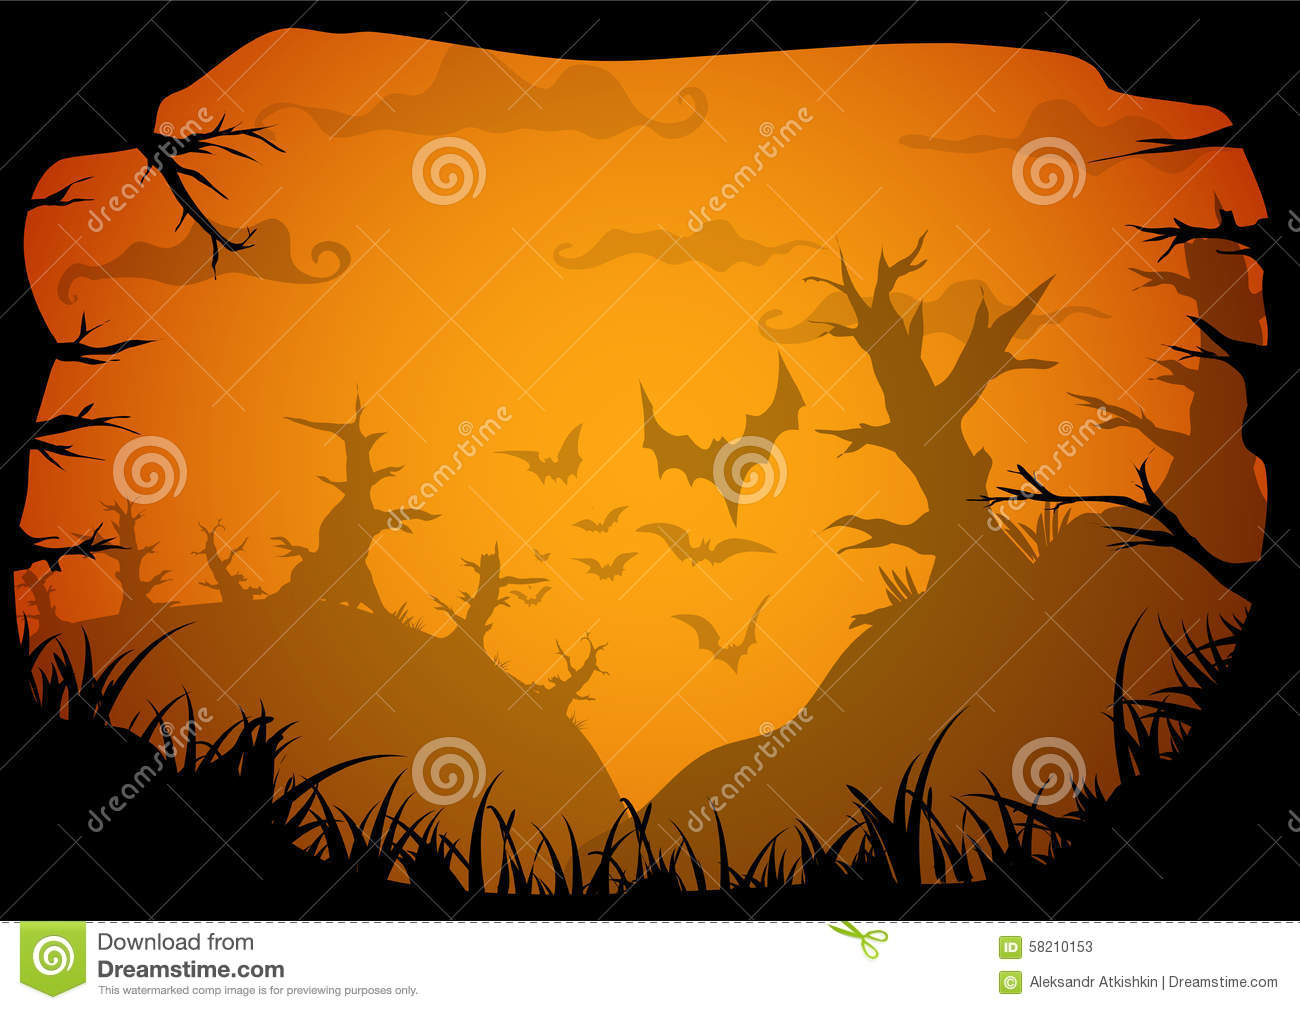 Halloween Backgrounds and Borders with Trees